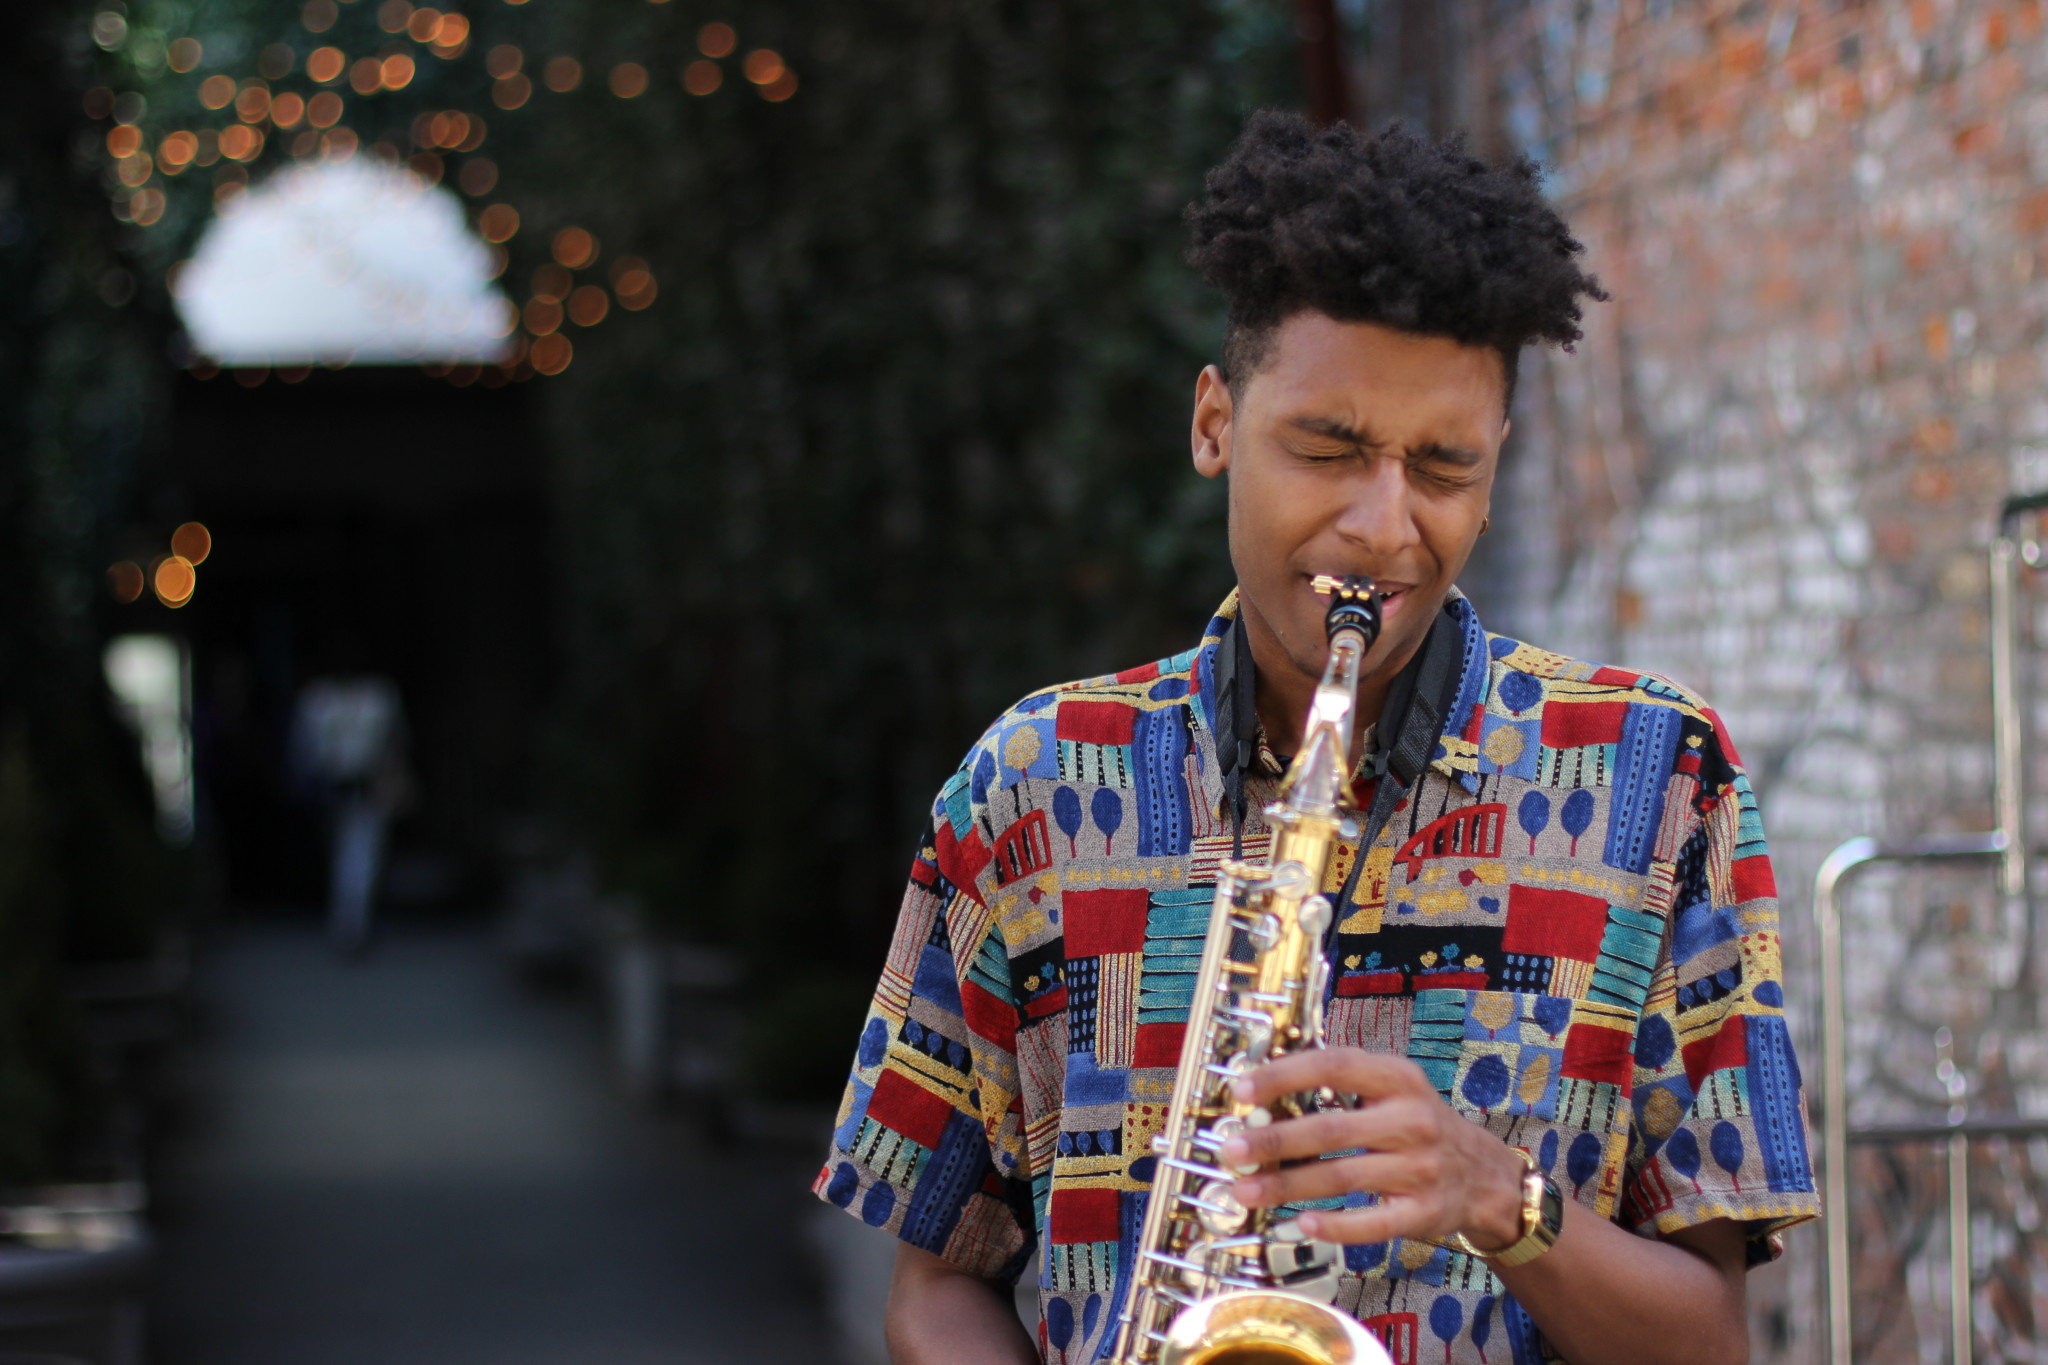 Masego traphousejazz star, Seven things to know, American artist, The Sauce interview, 2050x1370 HD Desktop